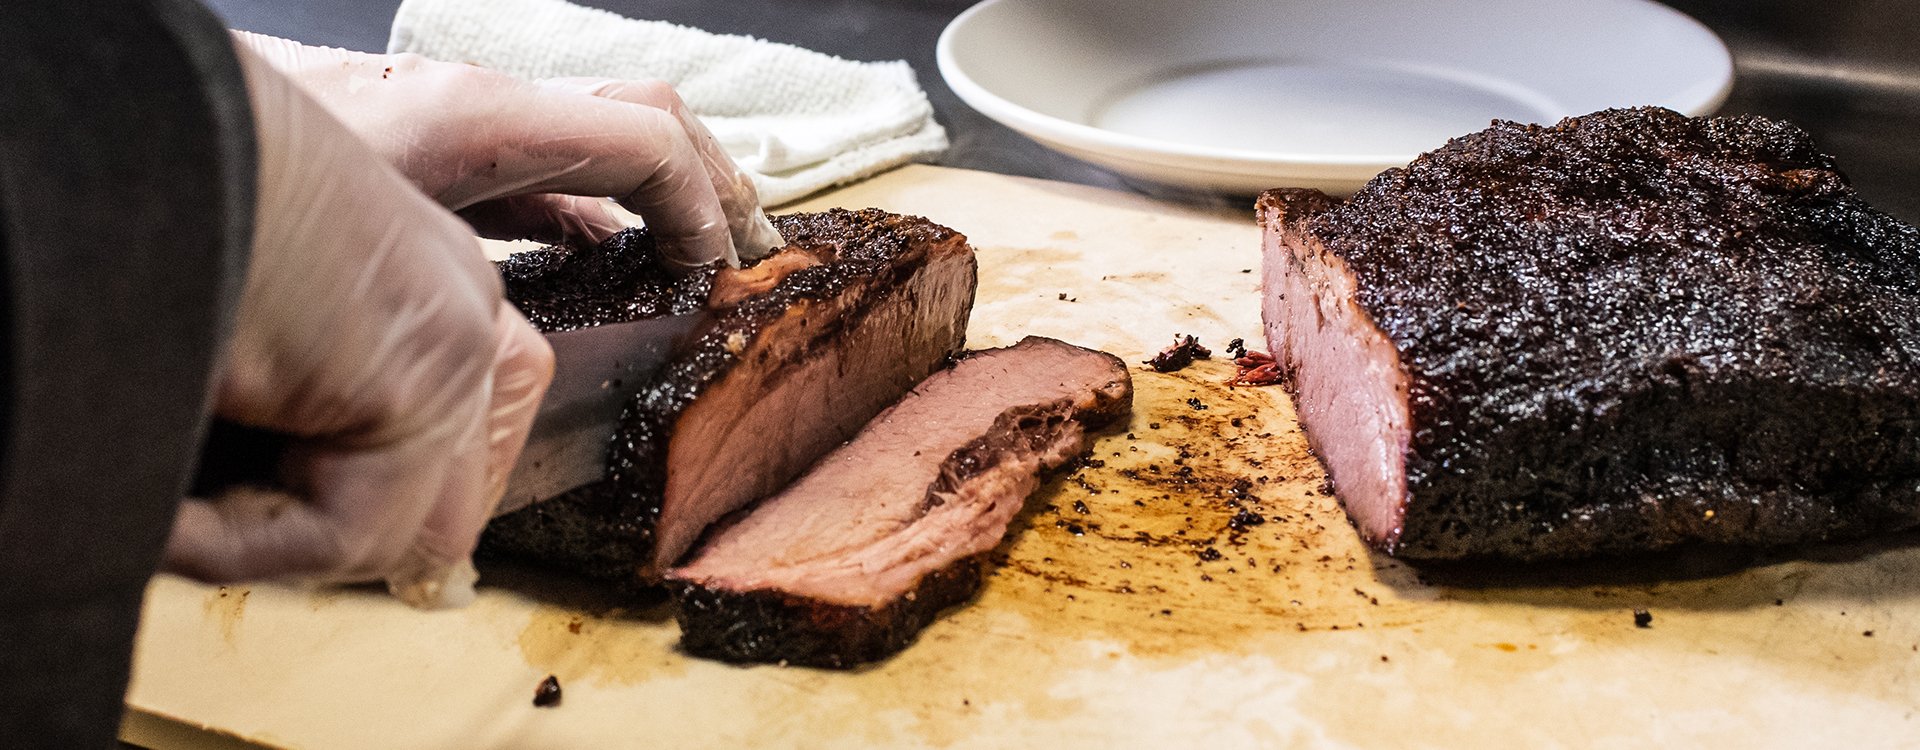 Cutting smoked brisket in slices